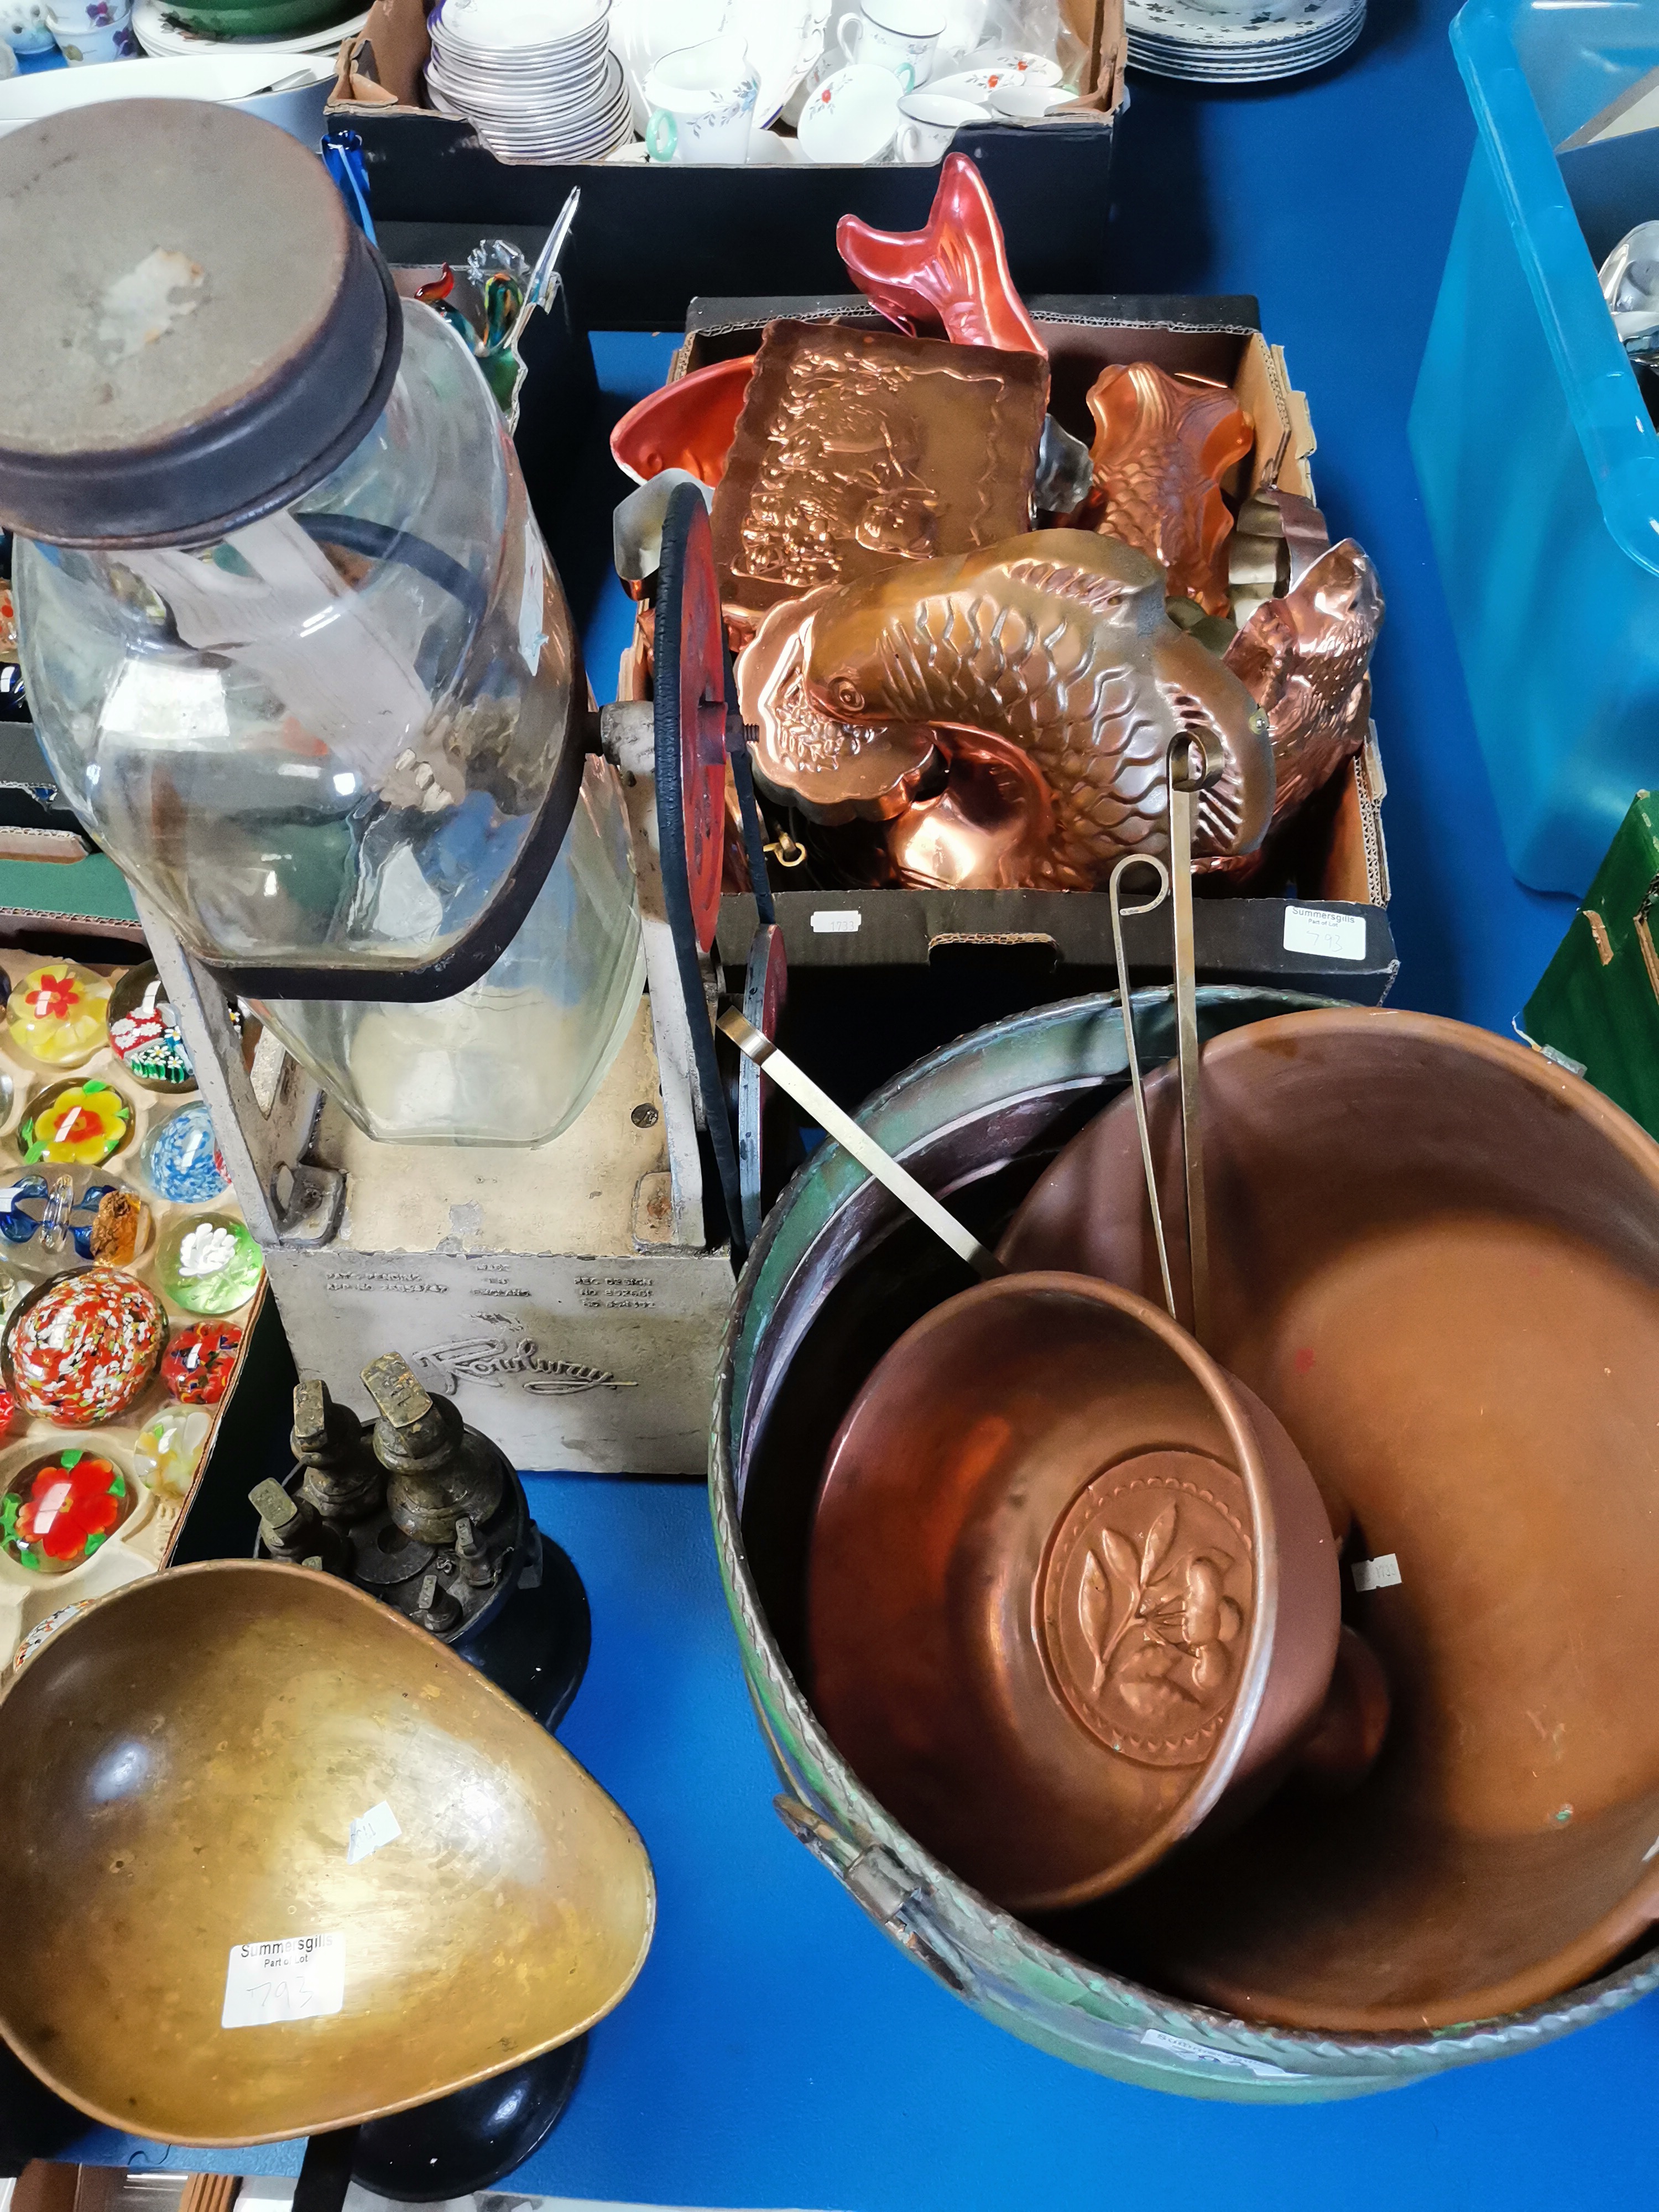 A Large Quantity of Loose Copperware, A Set of Scales, A Box of Copper Moulds and a "Rowlway" Machin